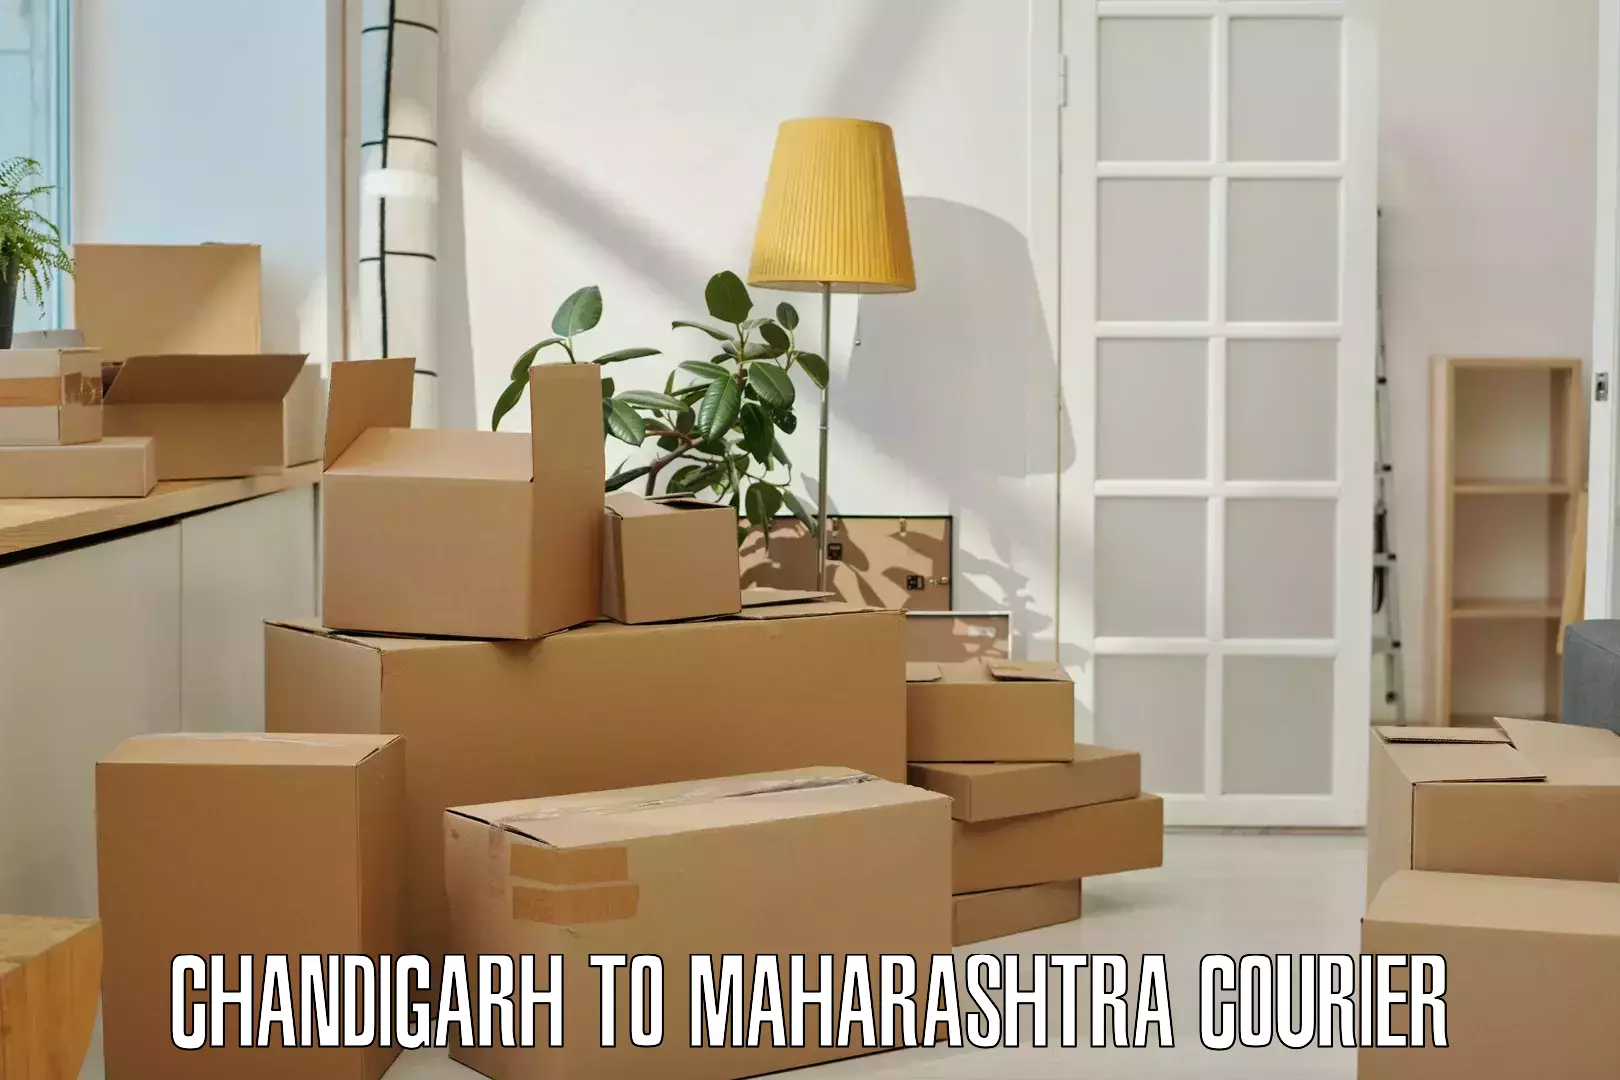 User-friendly delivery service Chandigarh to Maharashtra